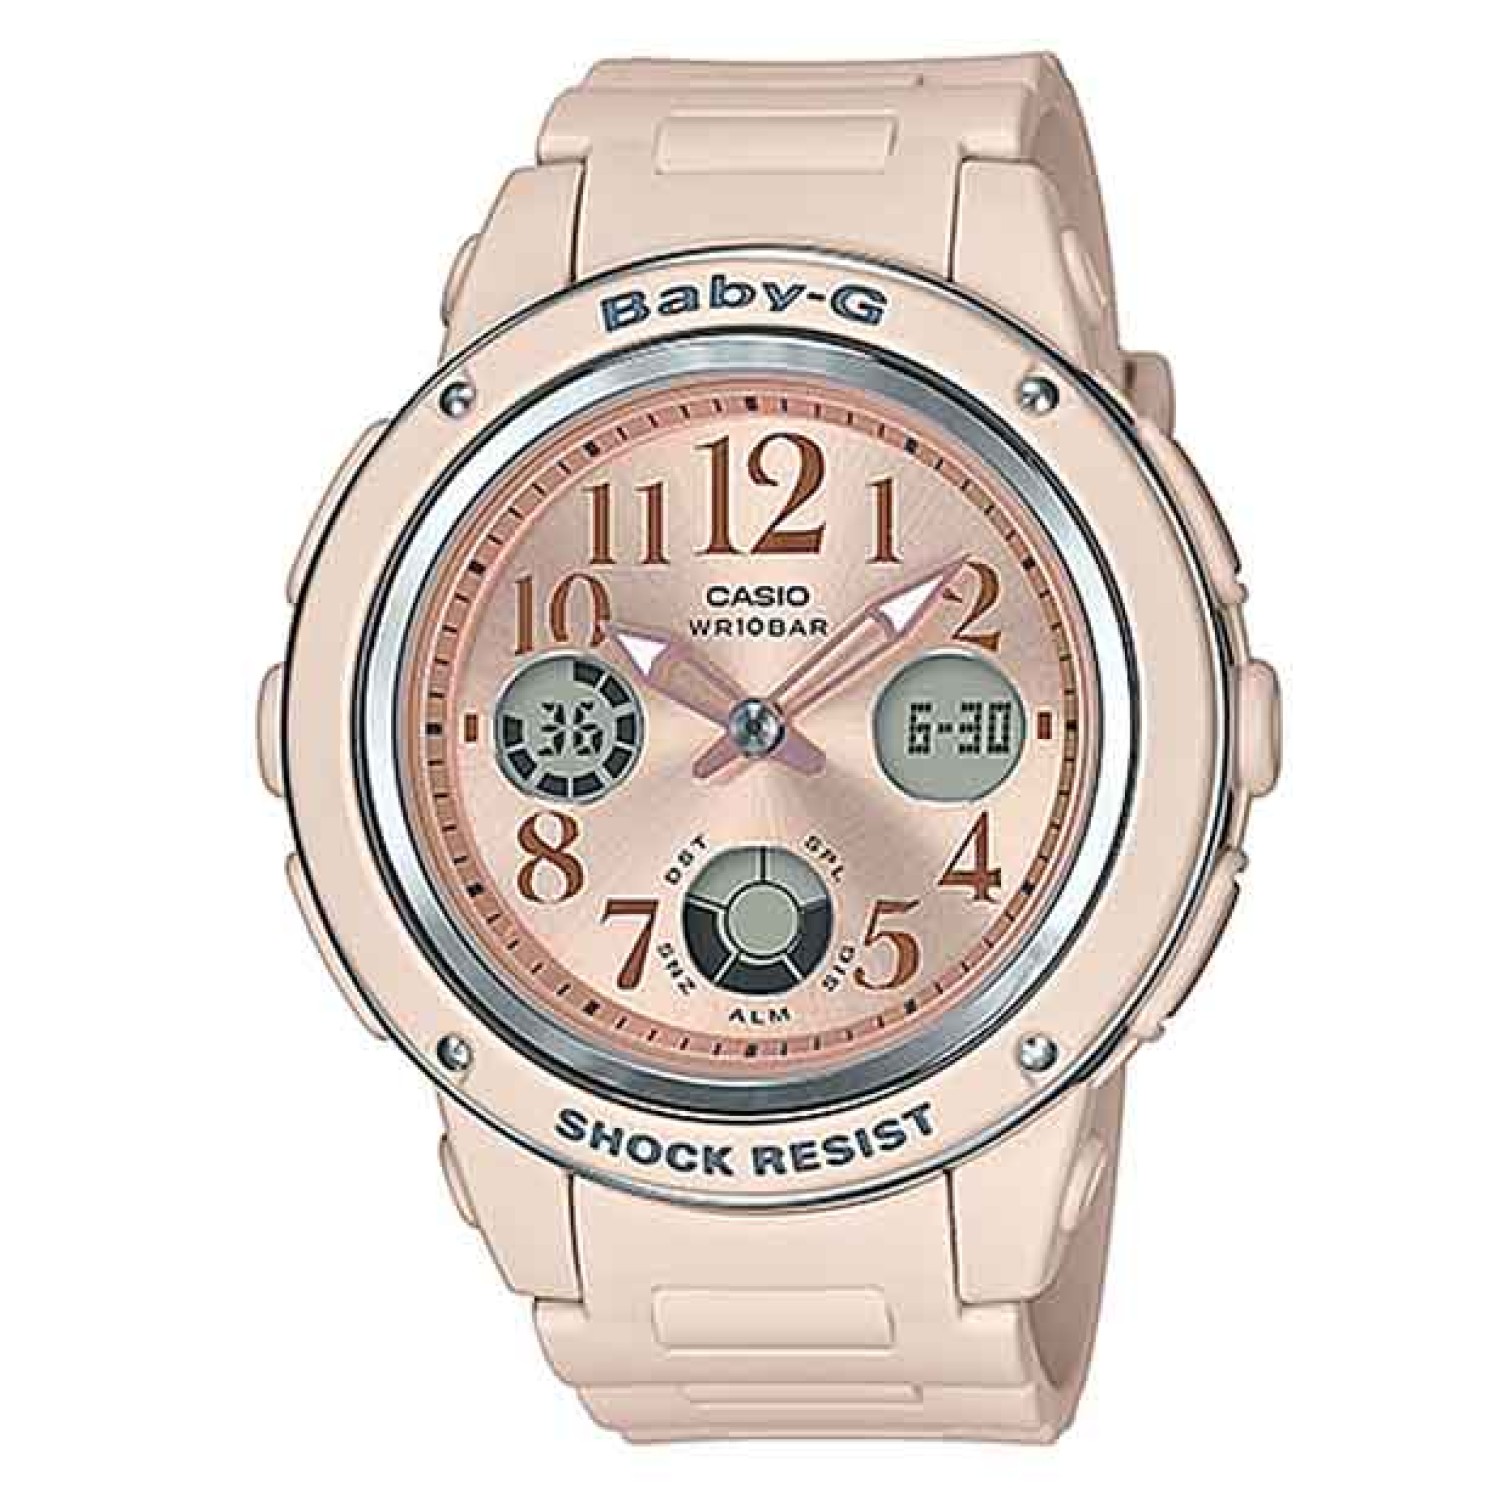 BGA150CP-4B Casio BabY-G Pink Beige Series.   Presenting new trendy colored pink beige additions to the lineup of casual BABY-G watches for the active woman of today. Base model is the popular BGA-150 with simple face design. The accents of the light beig